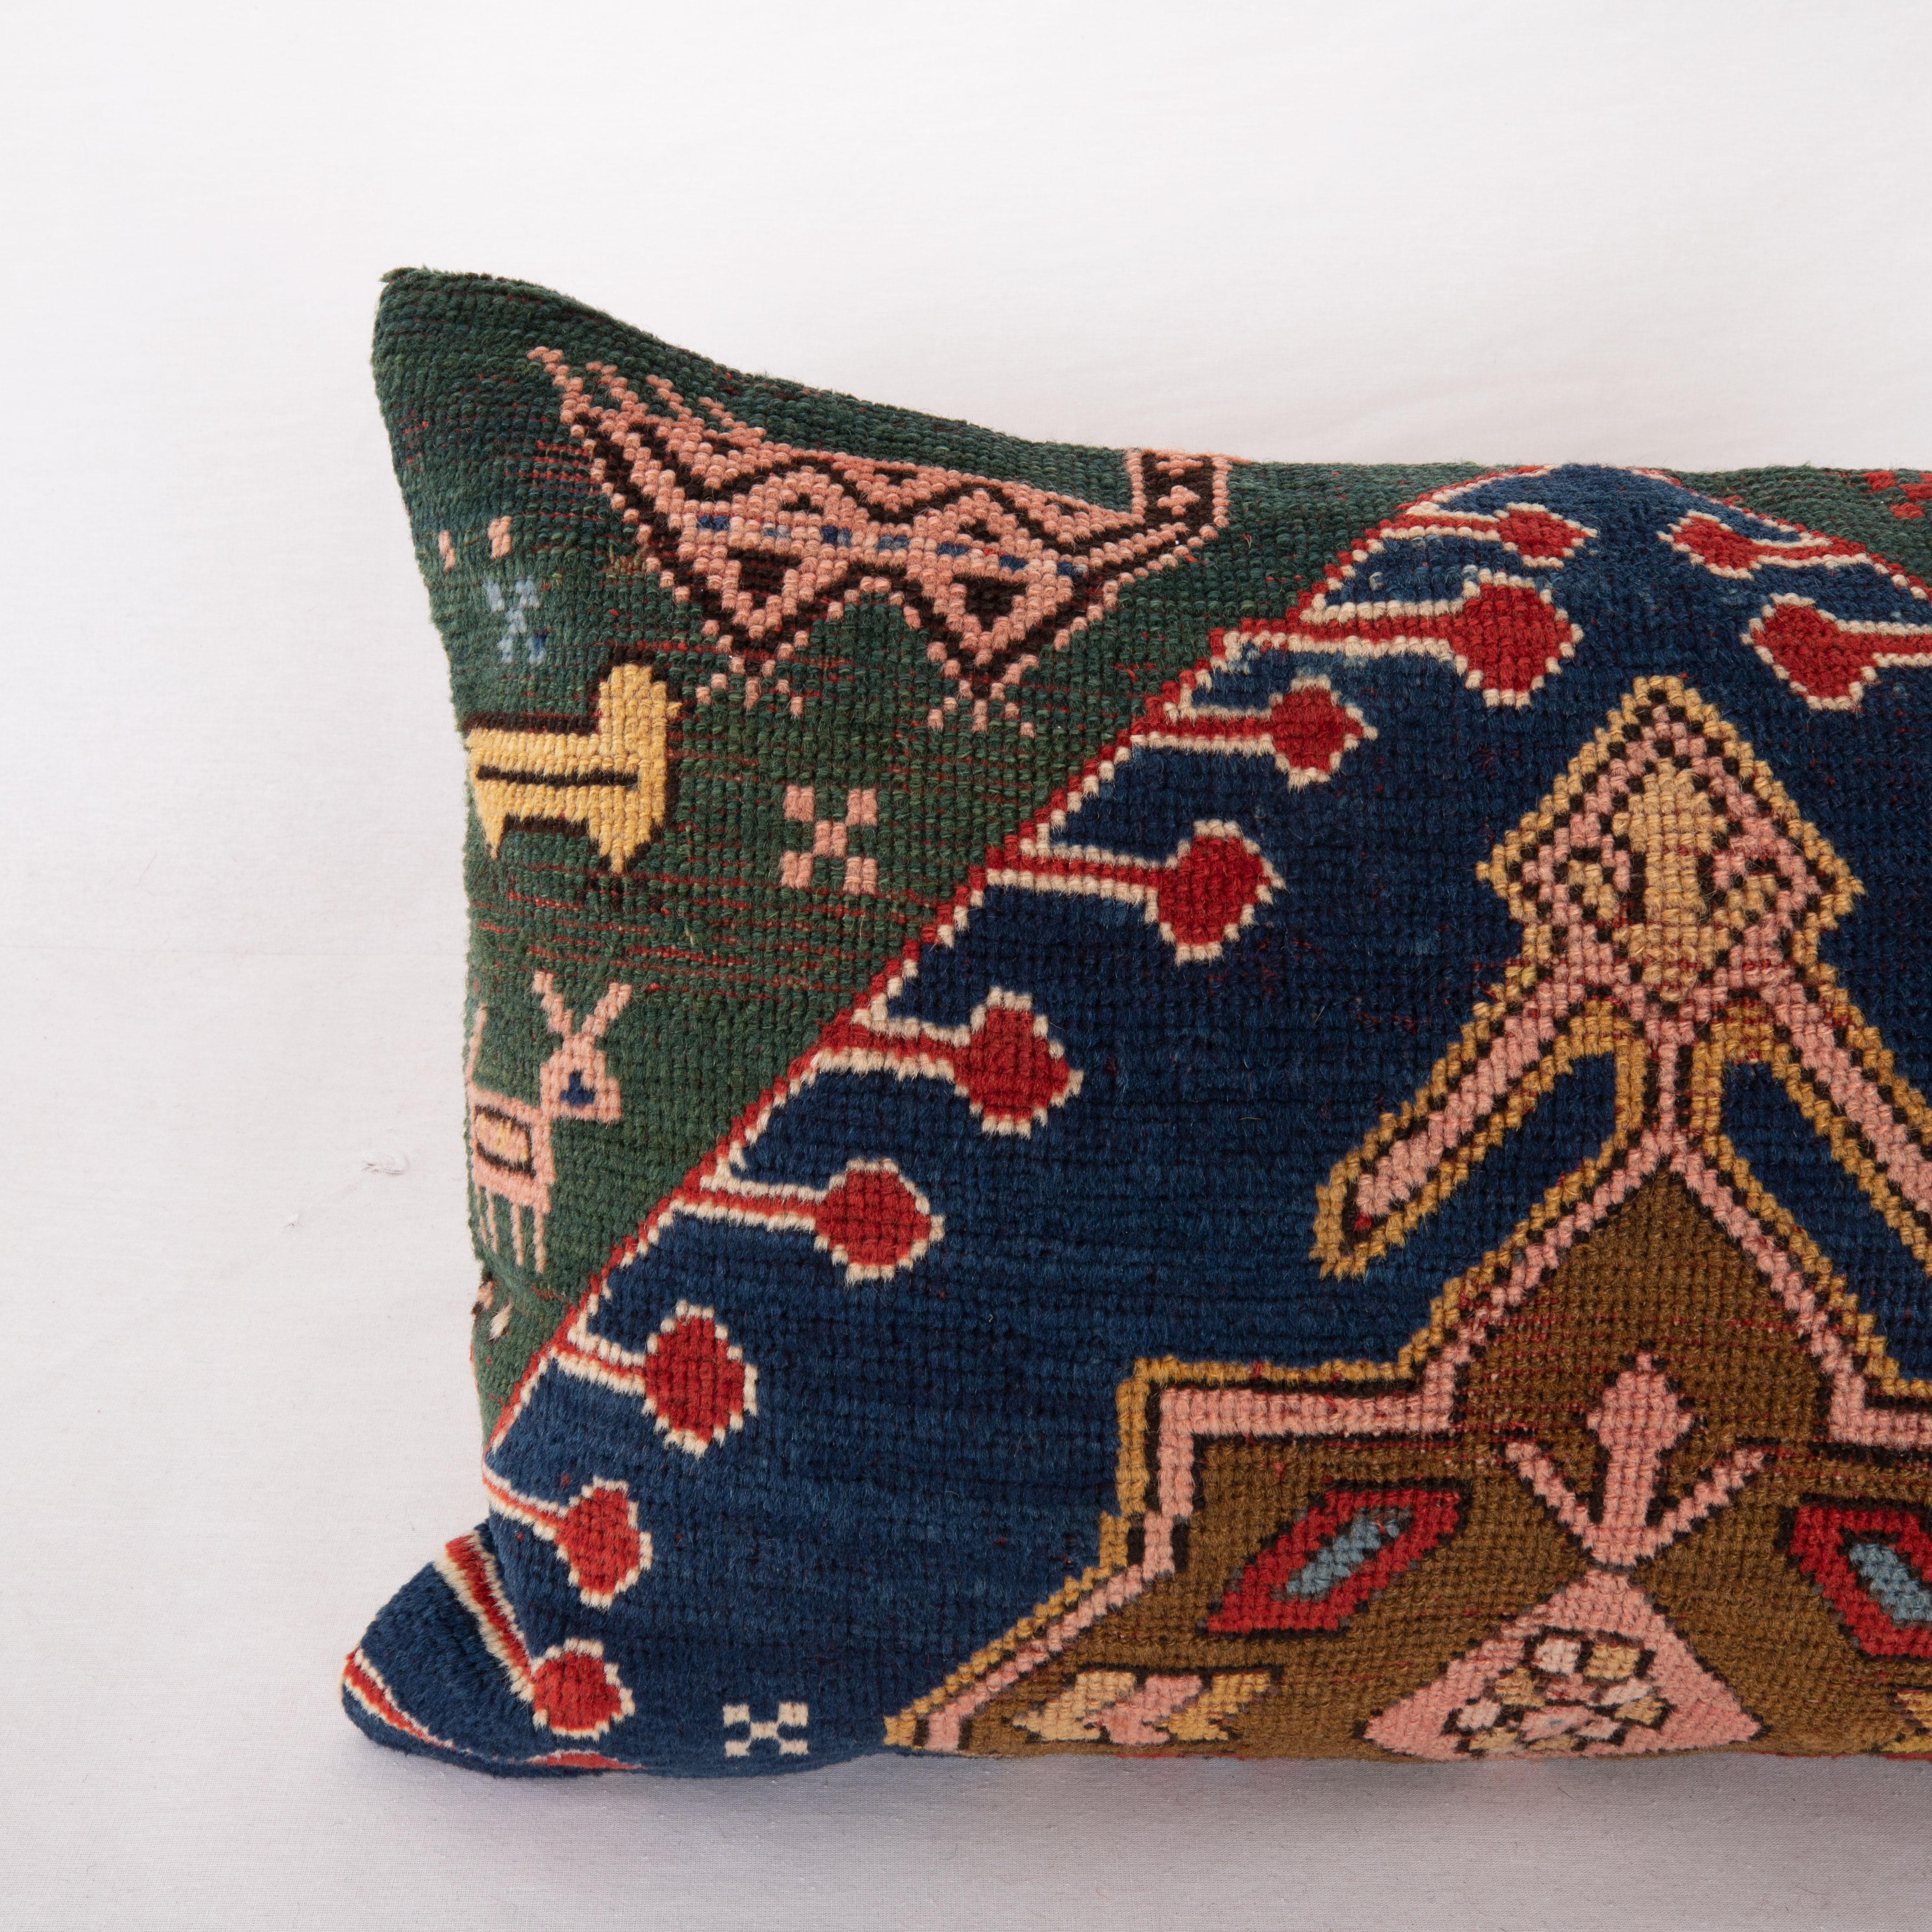 Armenian Antique Karabagh Rug Pillow Cover, Early 20th C. For Sale